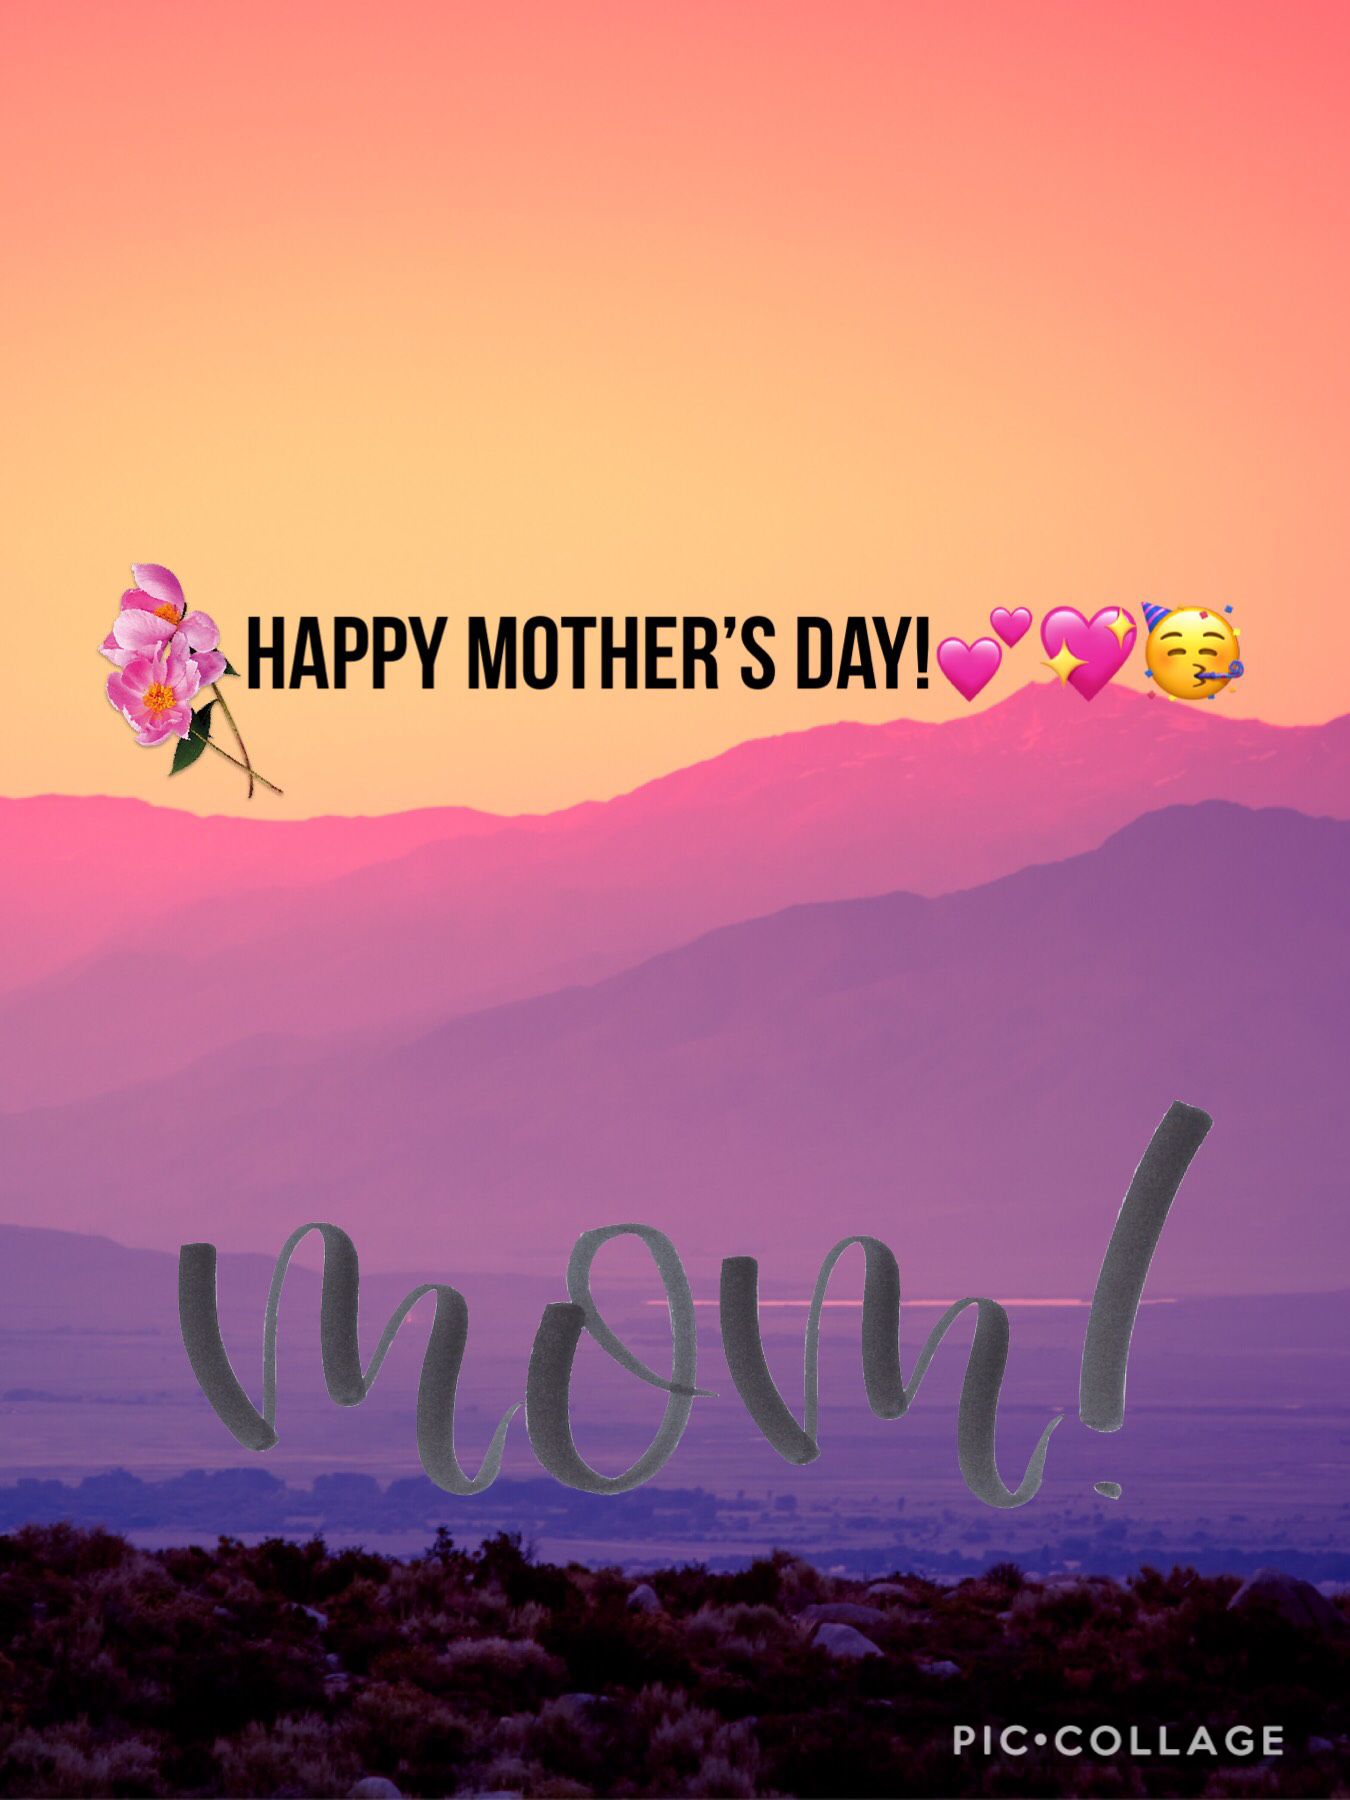 Happy Mother’s Day!👩👩‍🦱👱‍♀️👩‍🦳👵👩‍🦲To all moms!💖